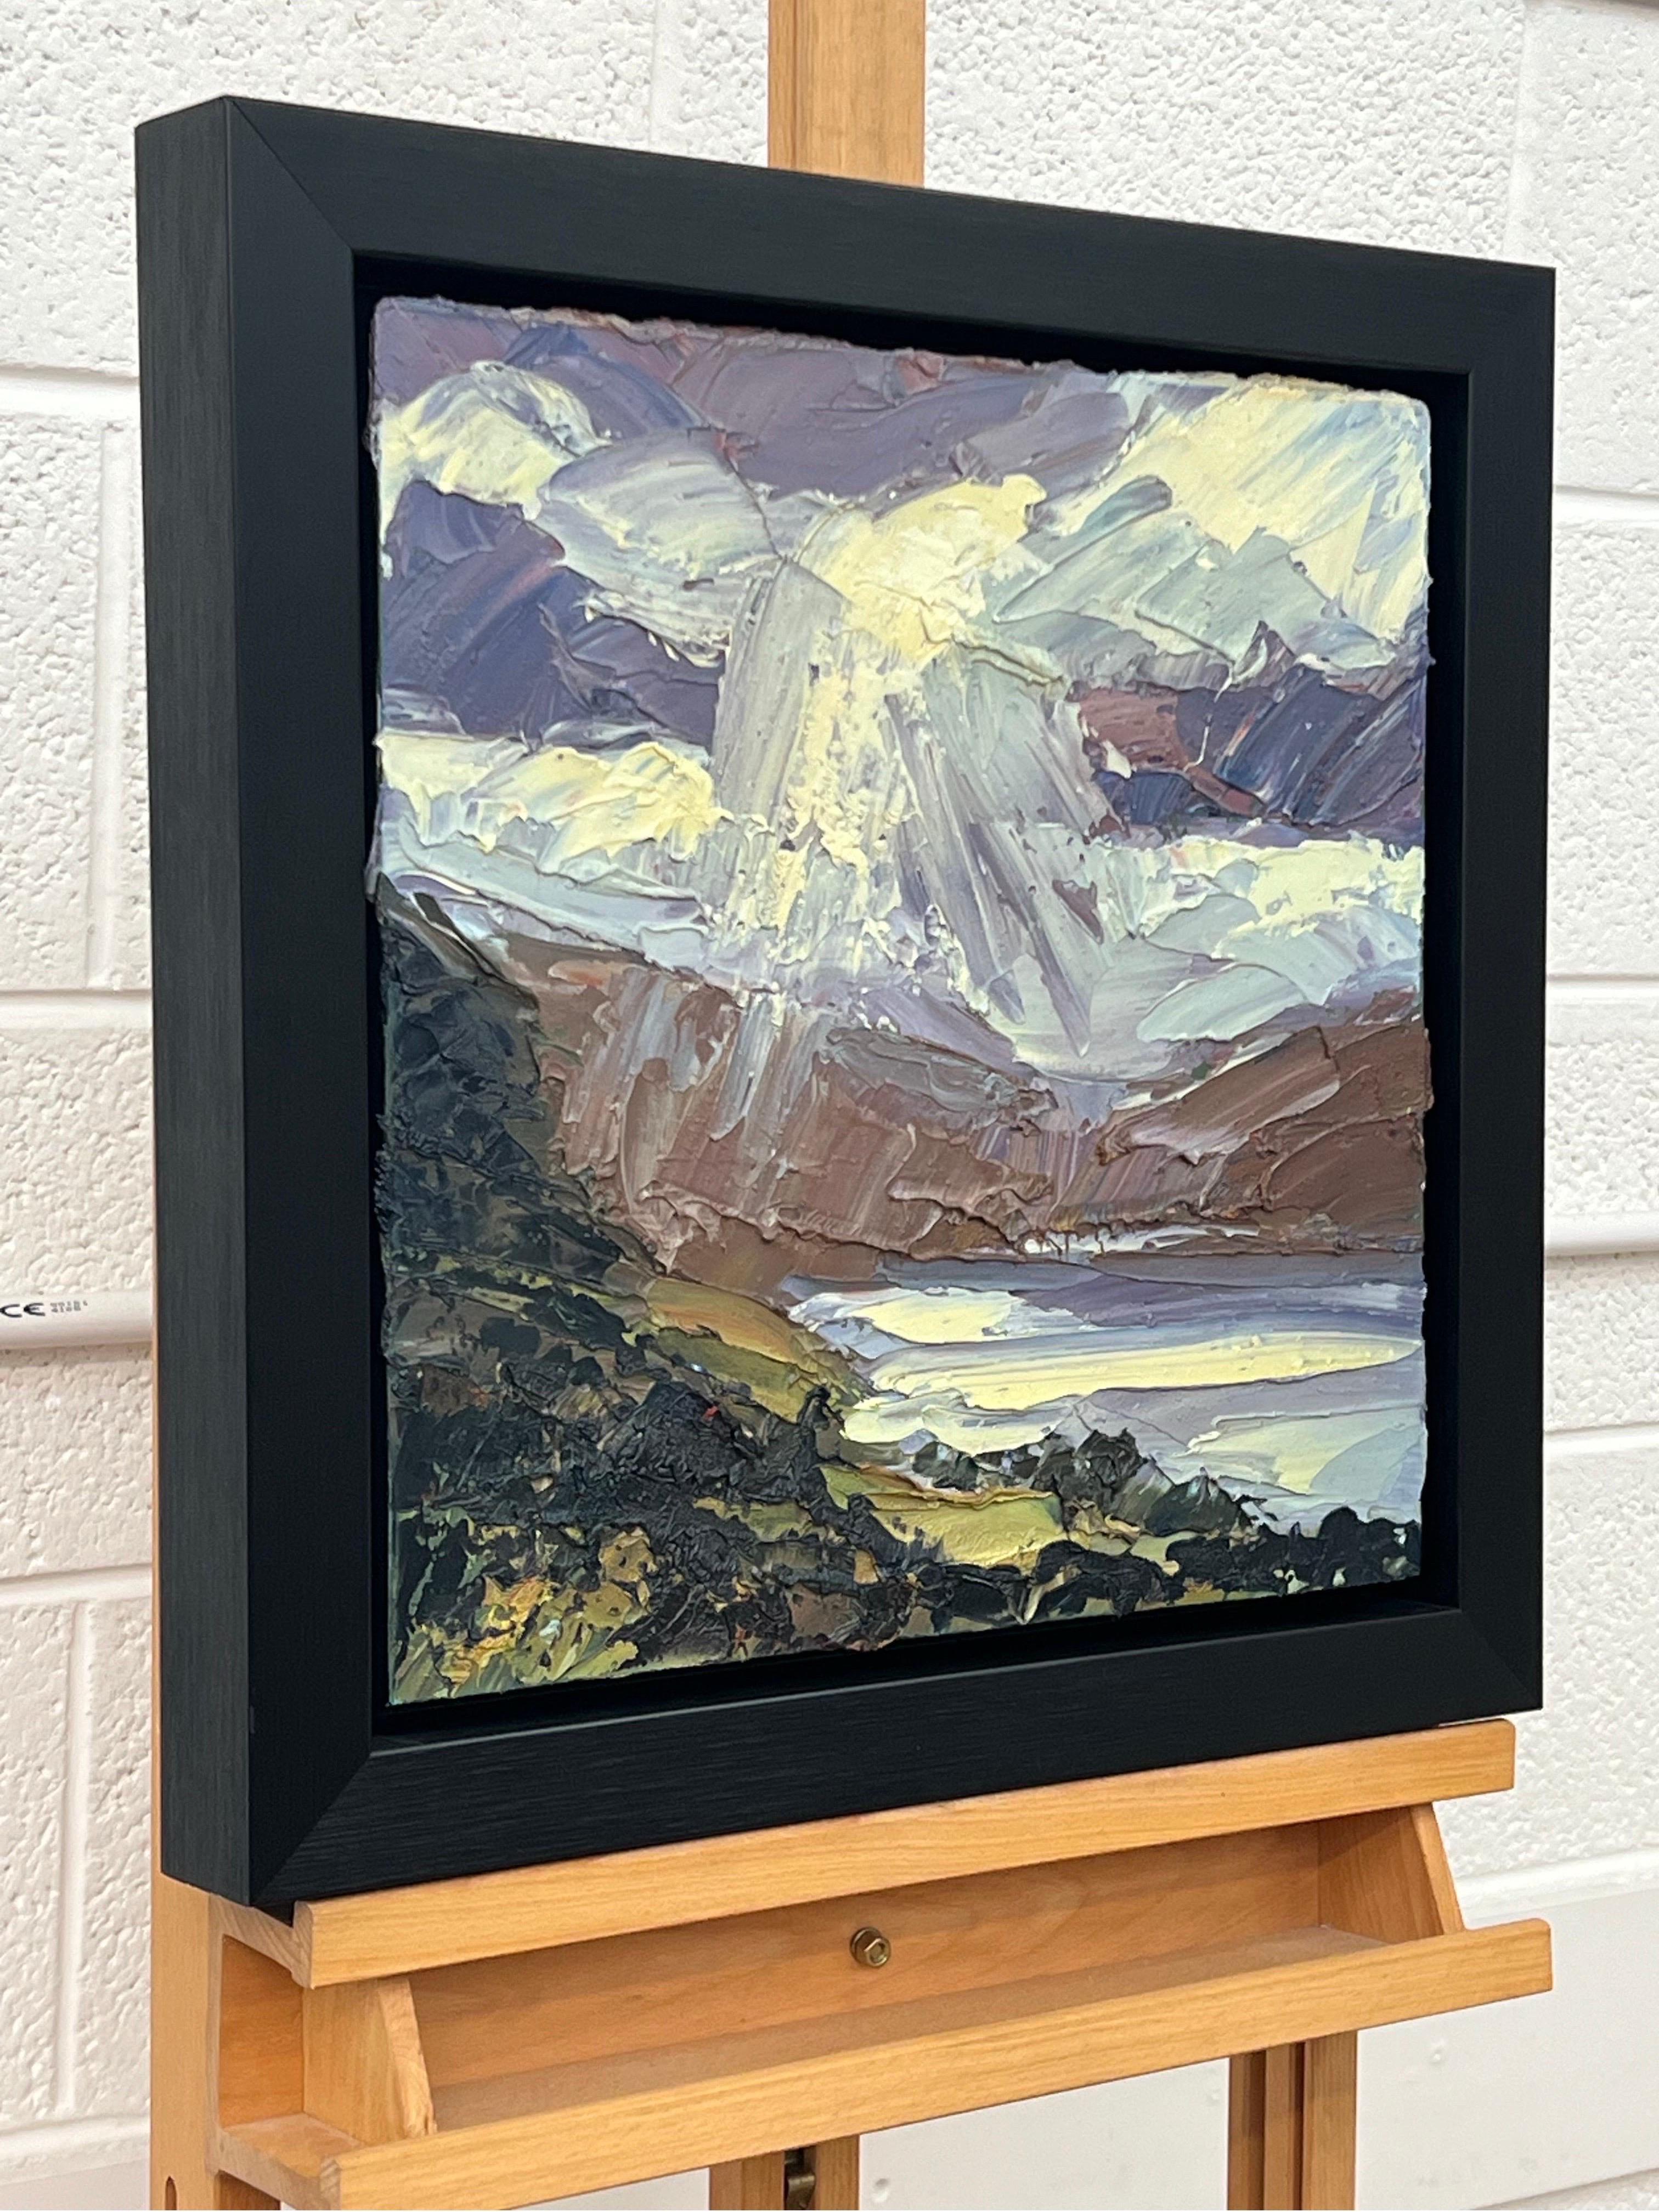 Impasto Oil Painting of Derwent Water in Keswick in the Lake District of England by British Landscape Artist Colin Halliday. This painting articulates the intensity of the clouds in Northern England, and the aesthetic beauty of the dramatic weather